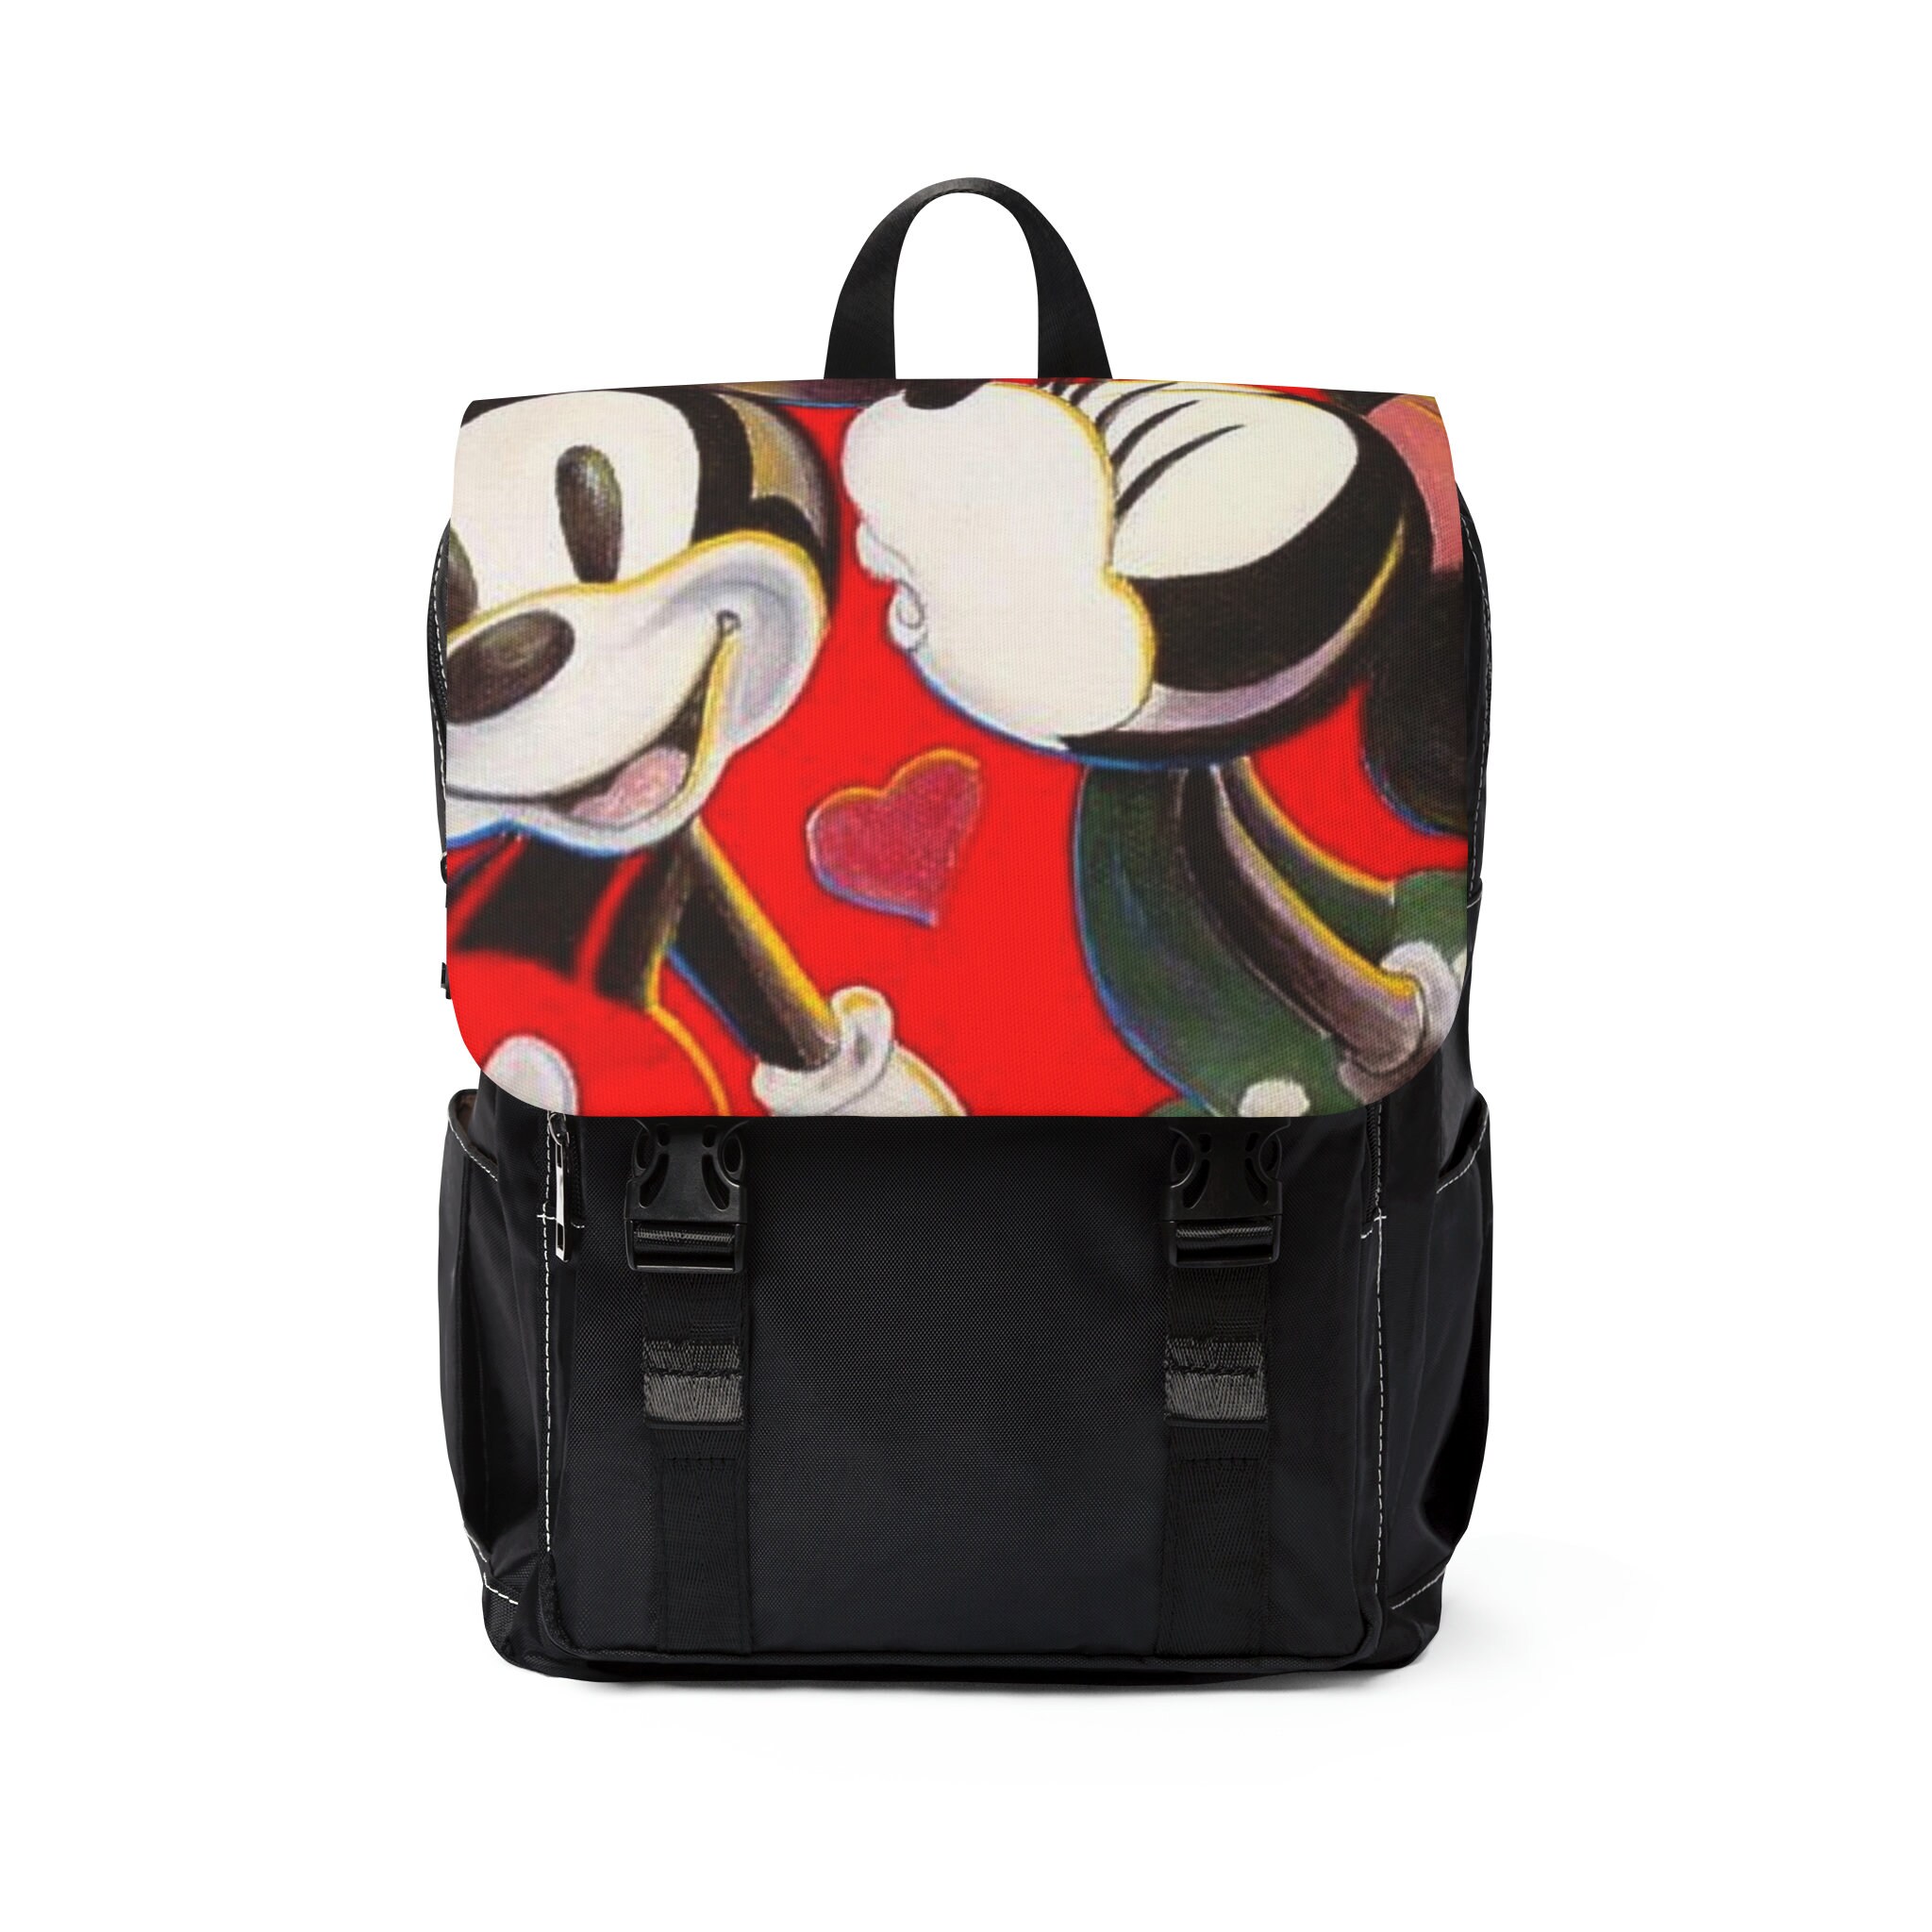 Discover Mickey And Minnie Disney Unisex Casual Shoulder Backpack